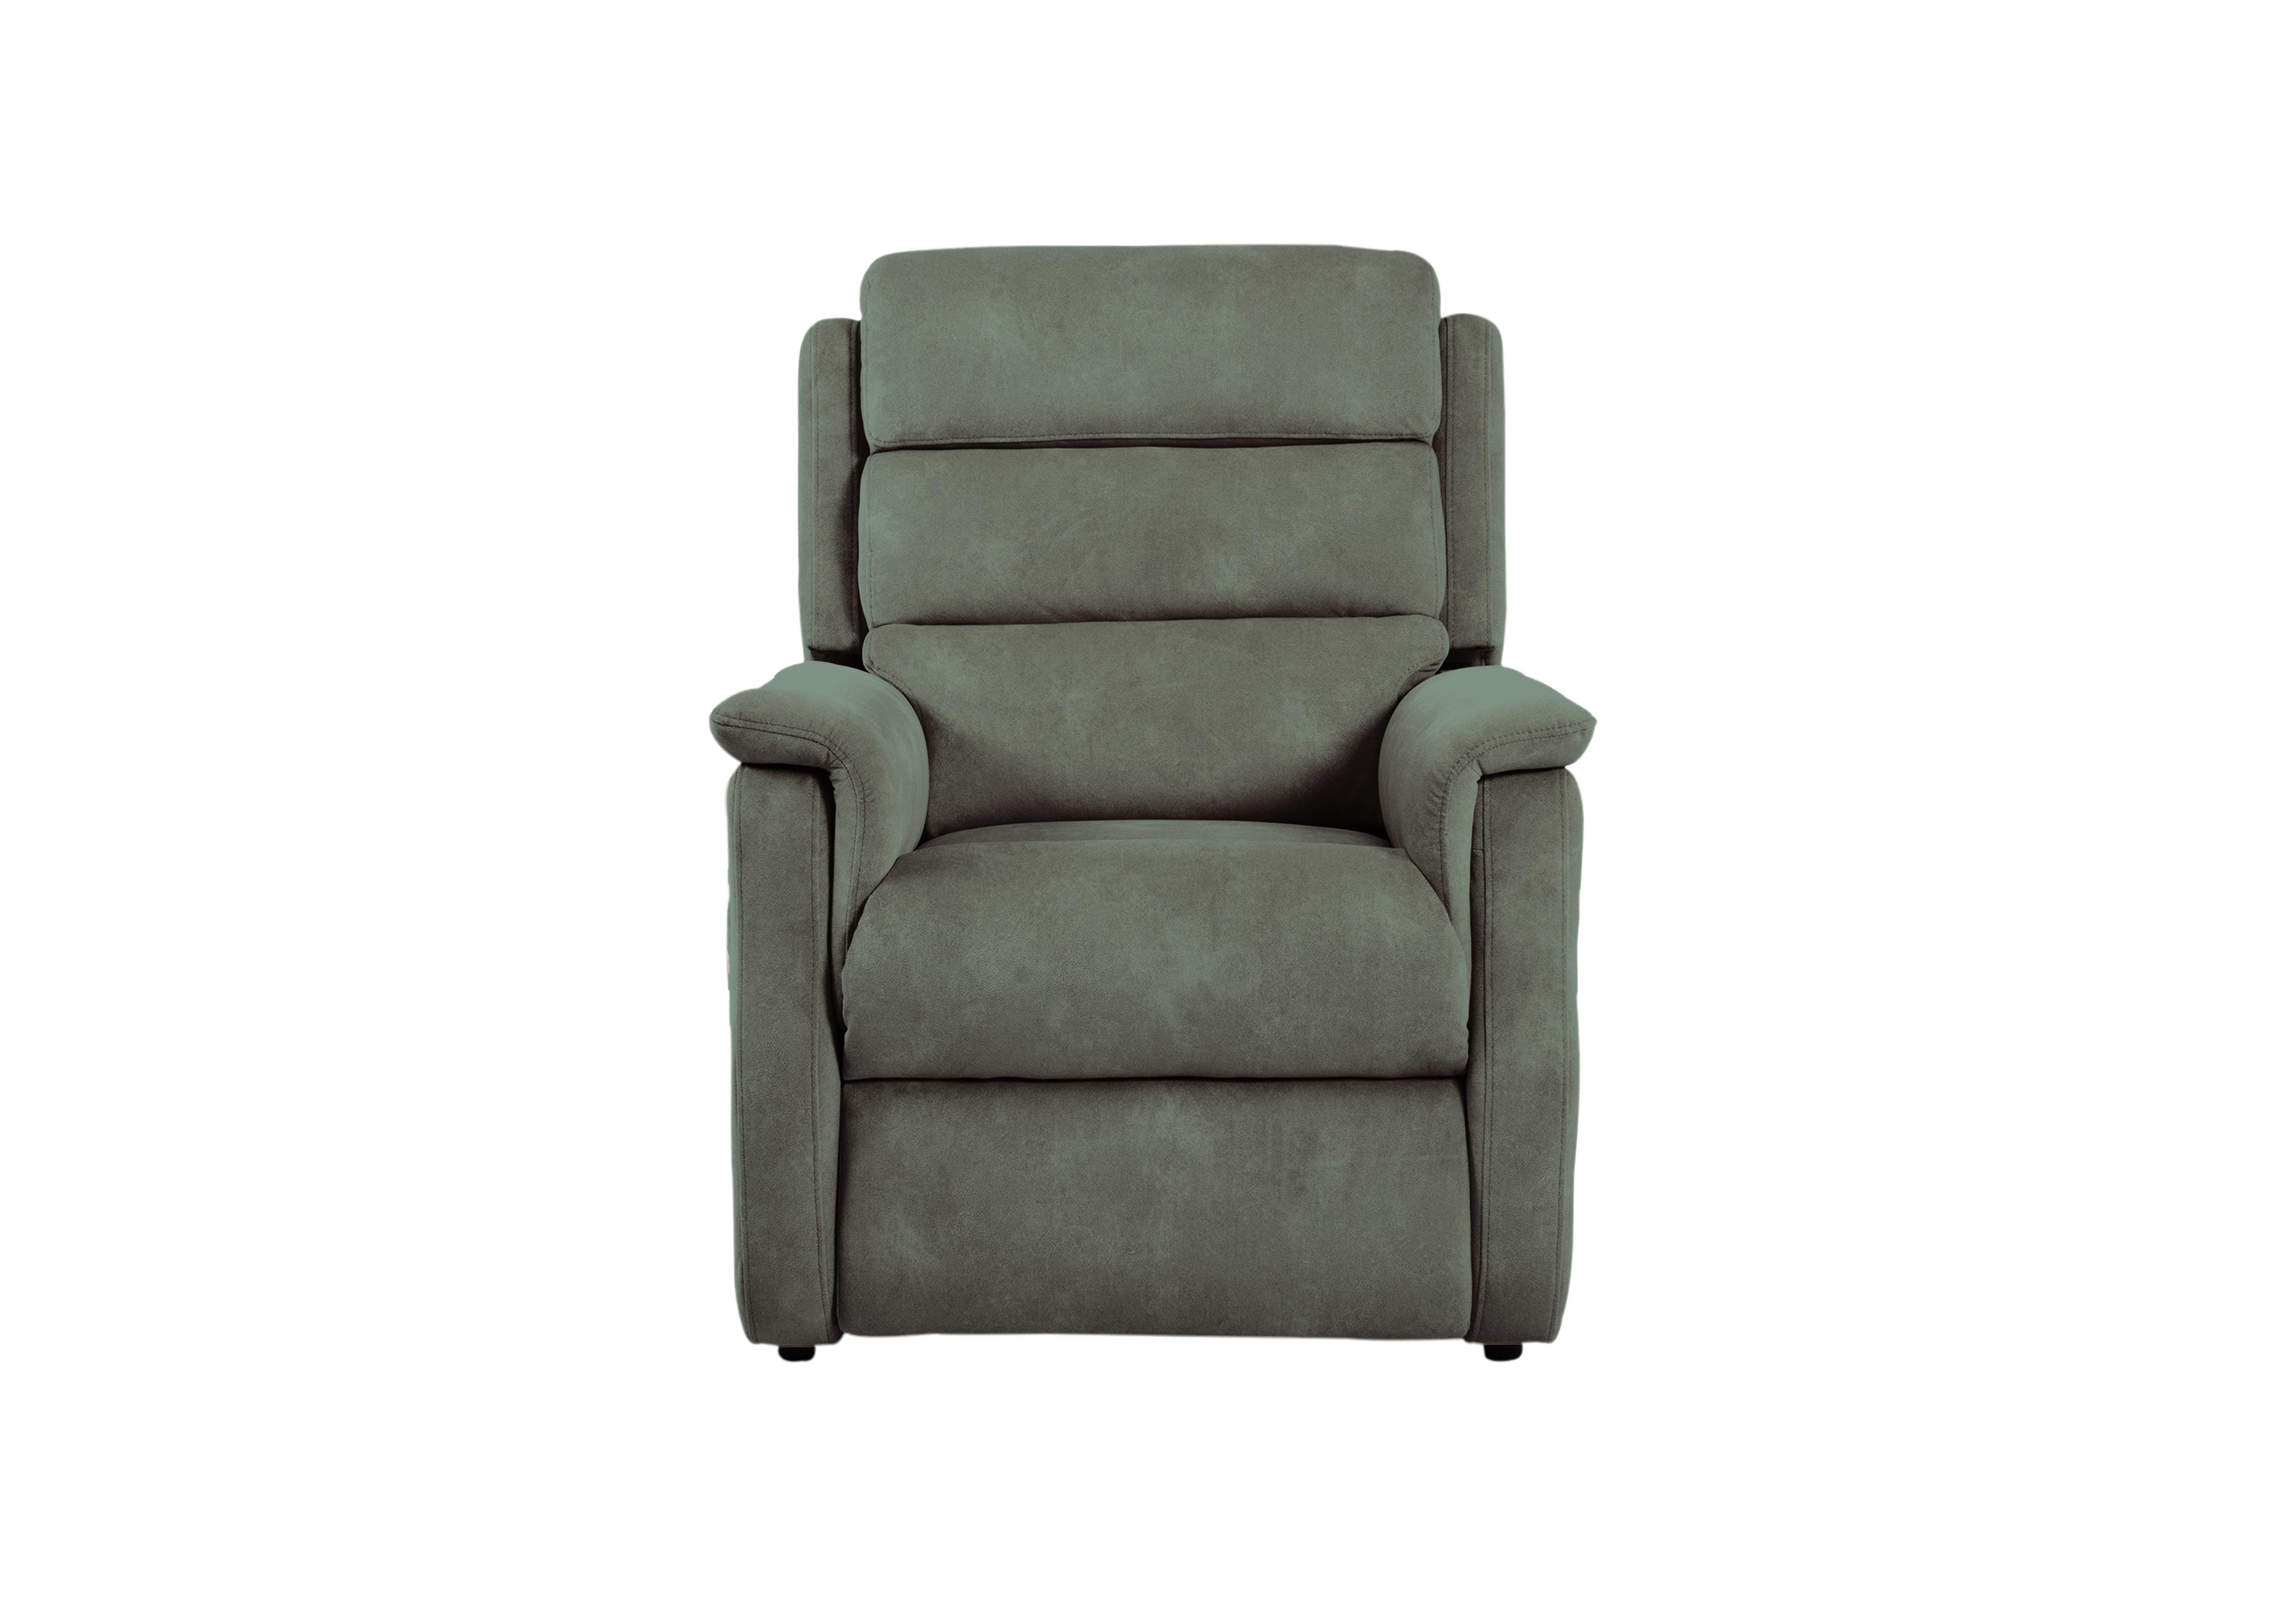 My Chair McCoy Fabric Lift and Rise Chair in 43514 Fern Dexter 14 on Furniture Village